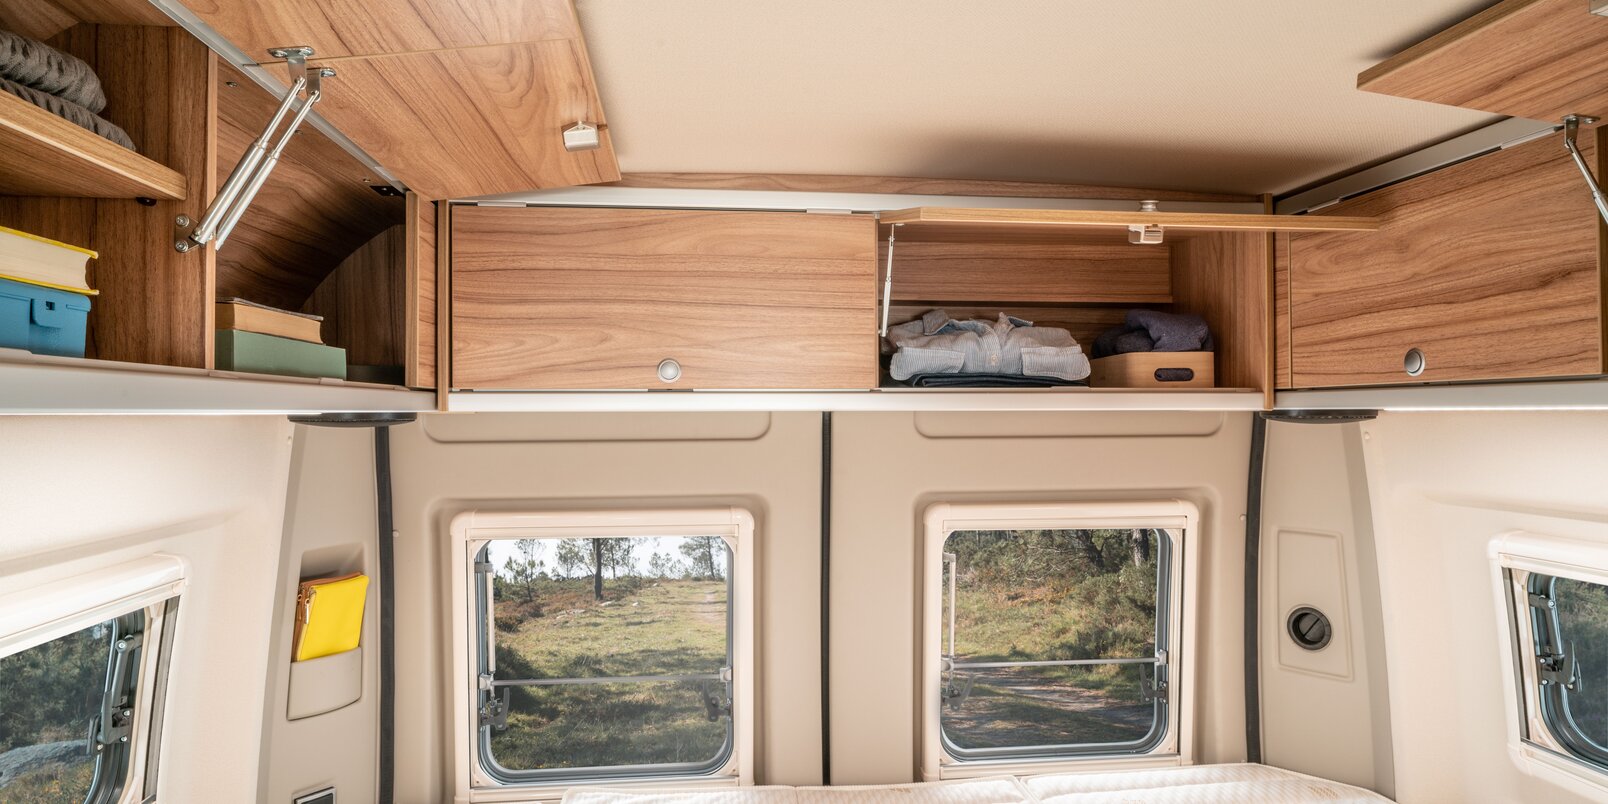 Overhead lockers above the bed / lounger area and side wall windows in the HYMER Camper Van are partially open and filled